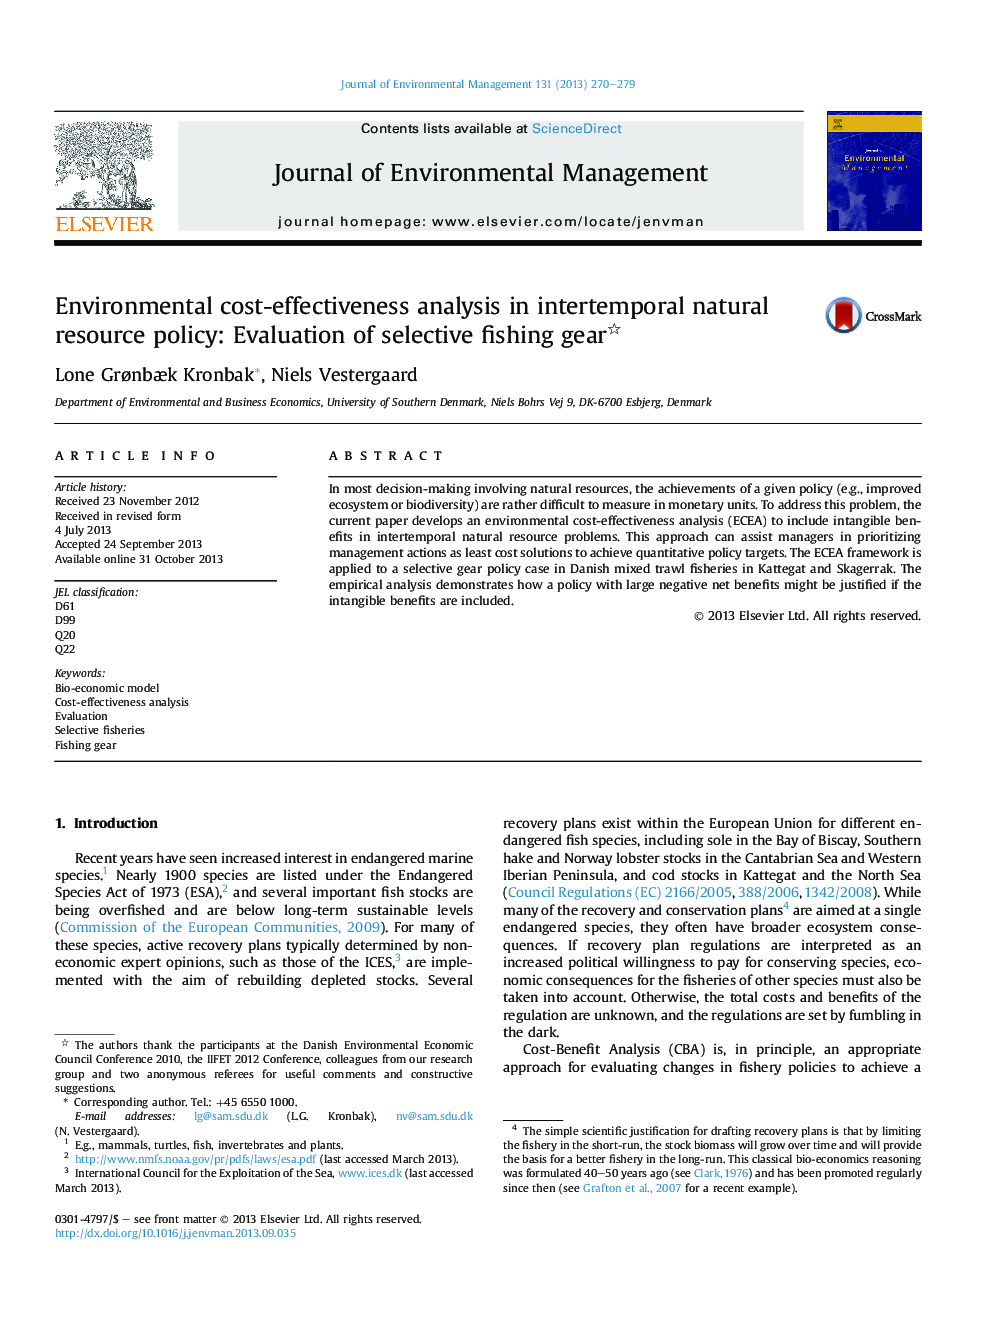 Environmental cost-effectiveness analysis in intertemporal natural resource policy: Evaluation of selective fishing gear 